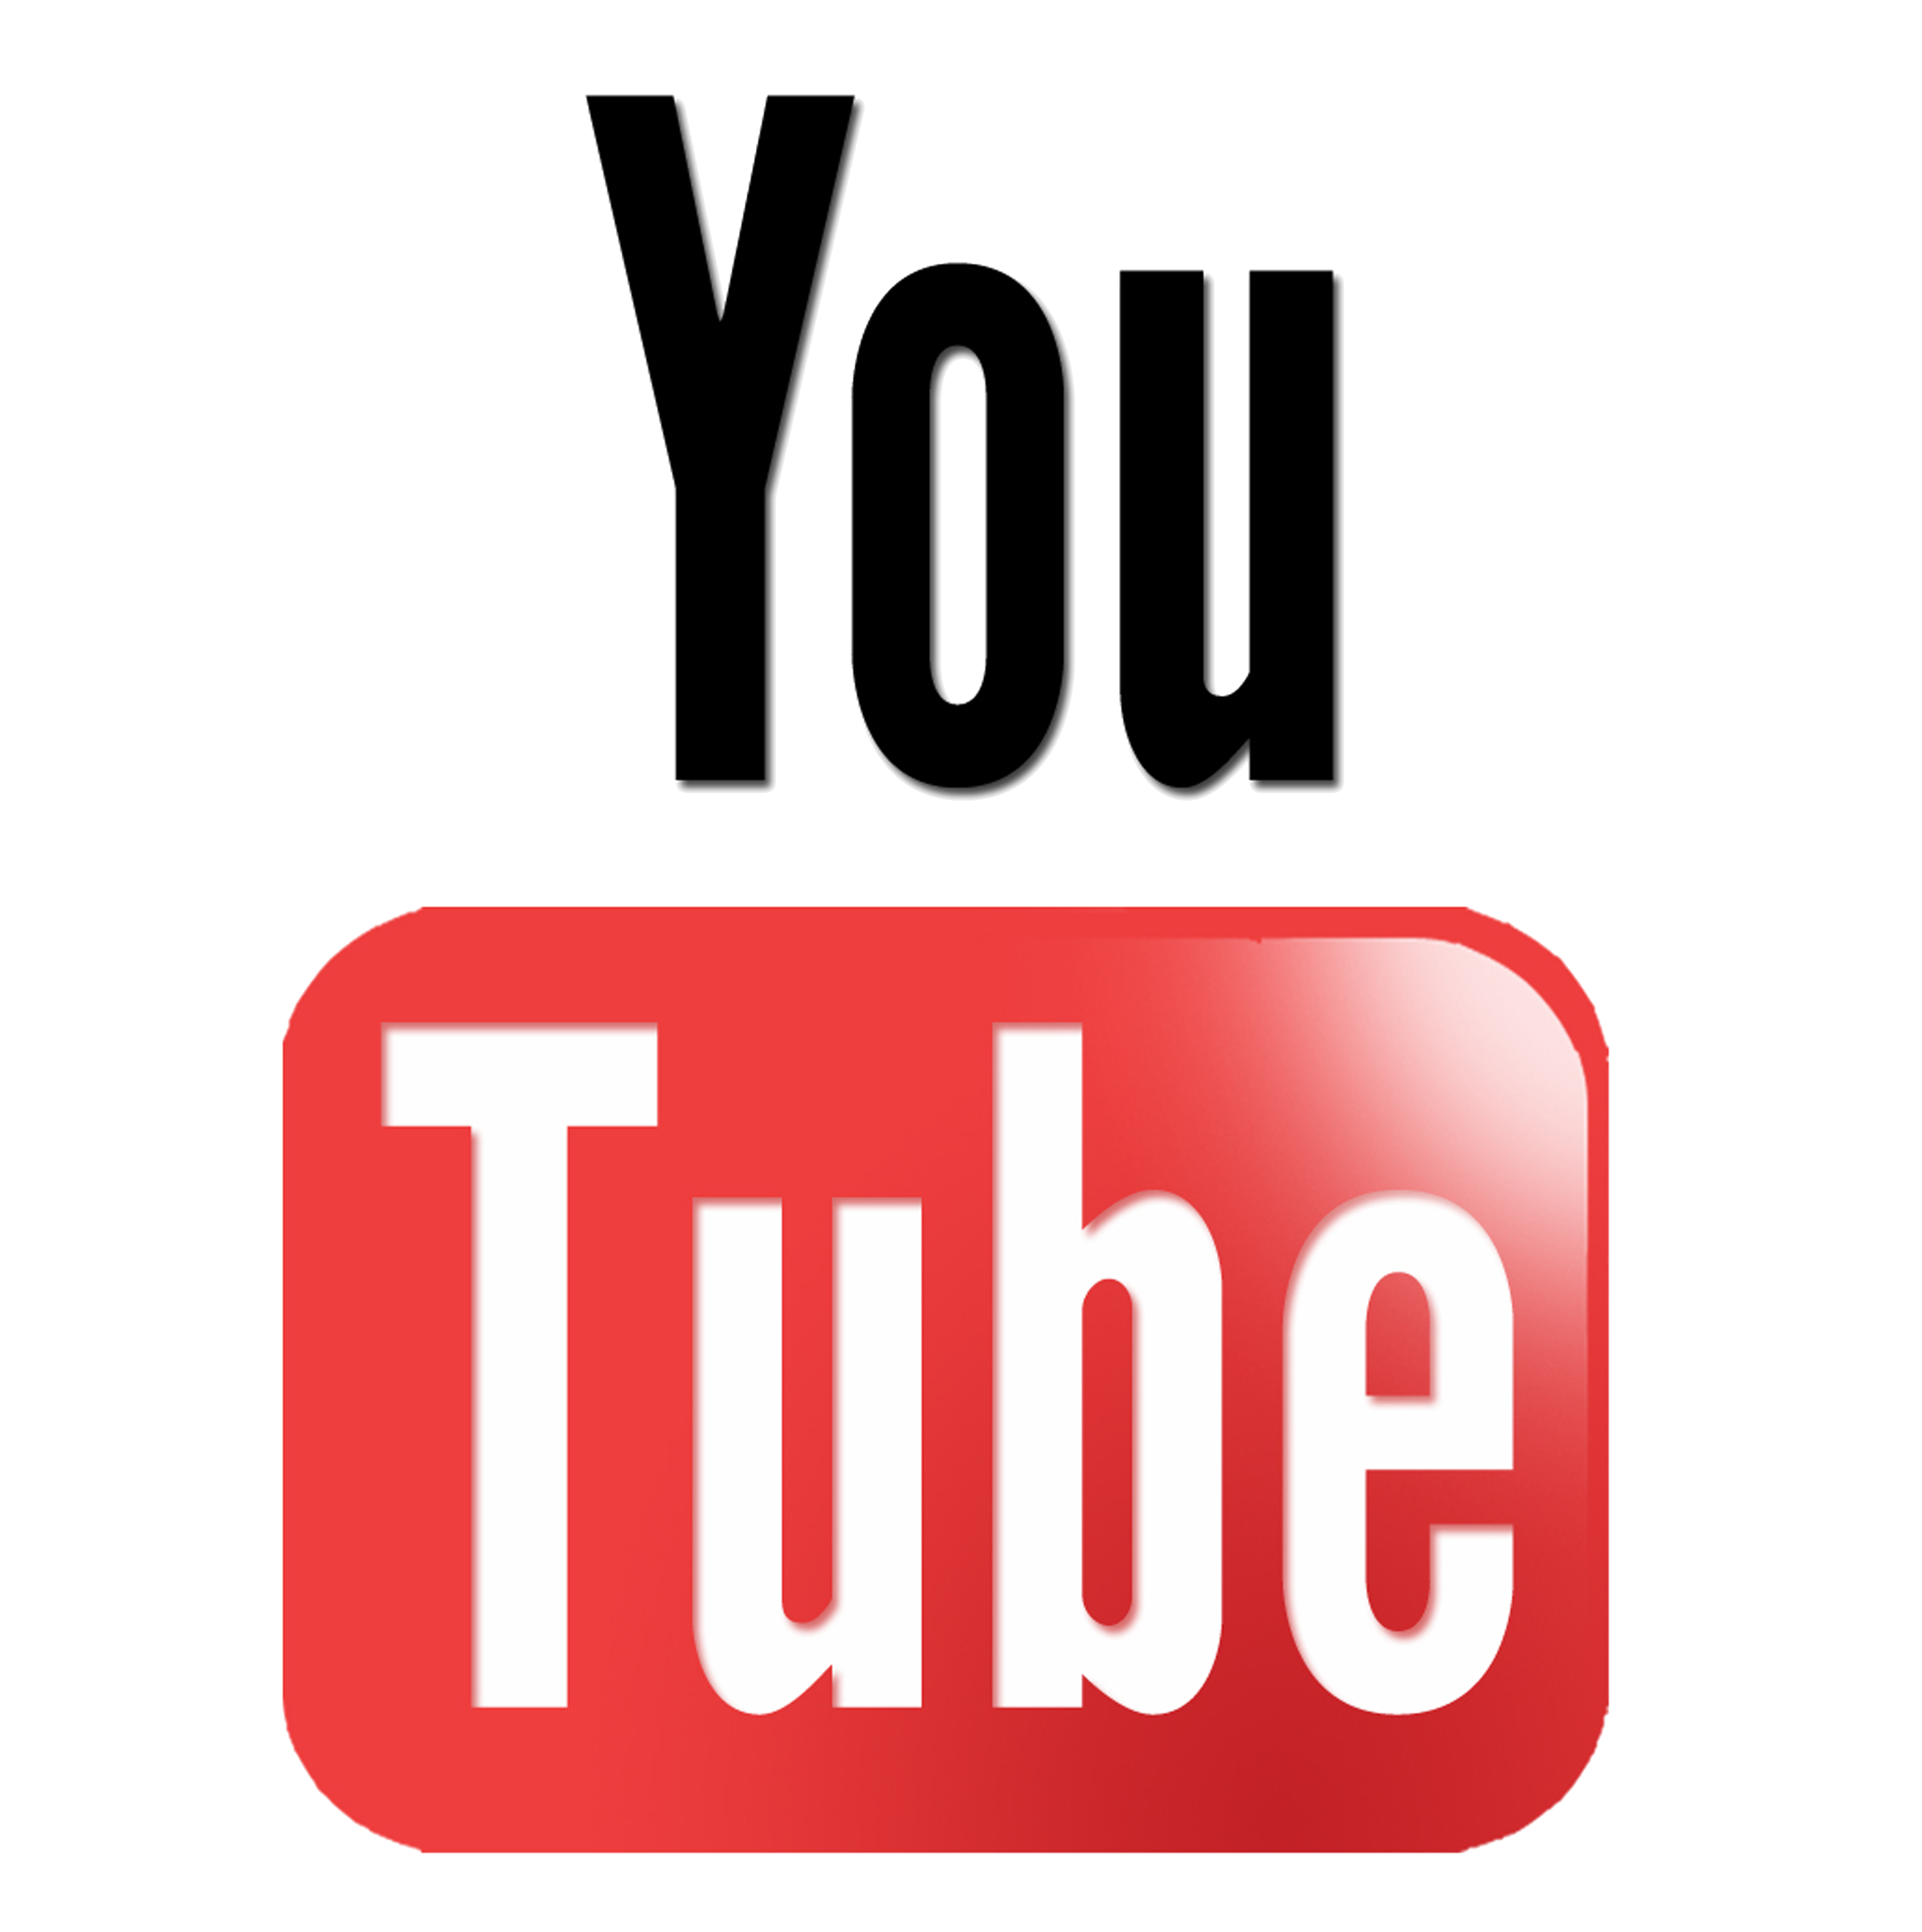 Logo Youtube PNG Images HD